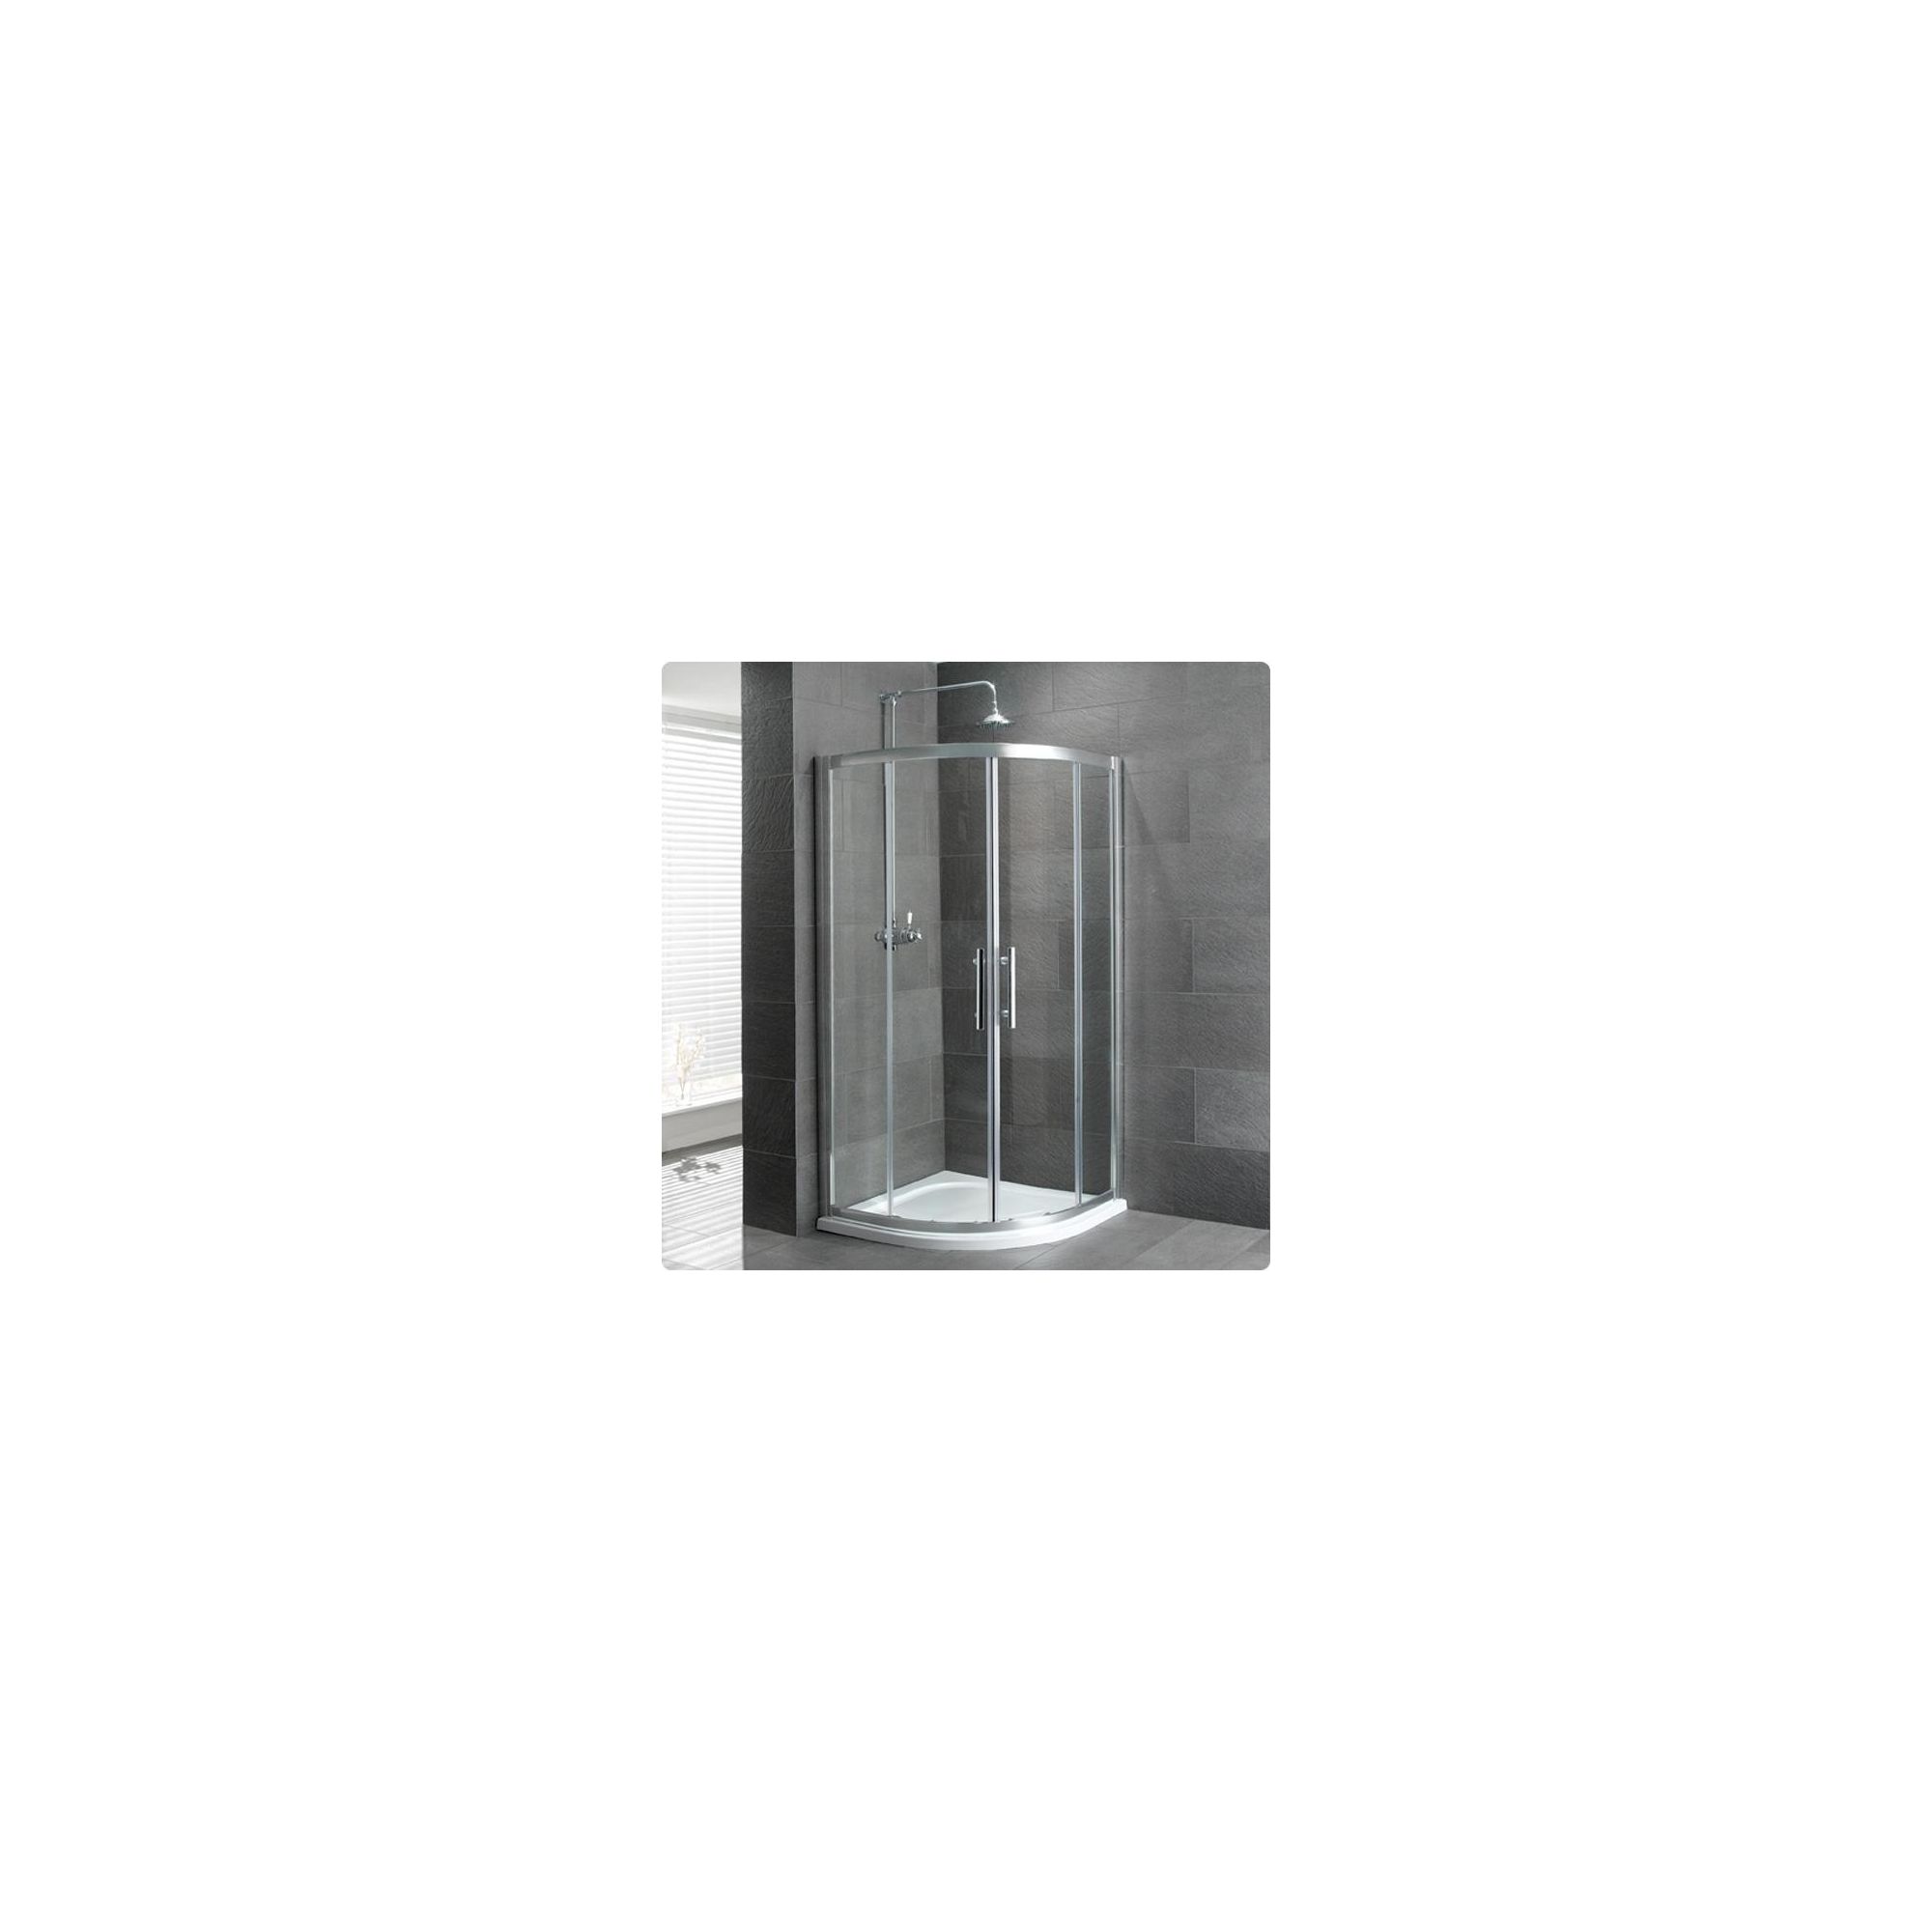 Duchy Select Silver 2 Door Quadrant Shower Enclosure 800mm, Standard Tray, 6mm Glass at Tescos Direct